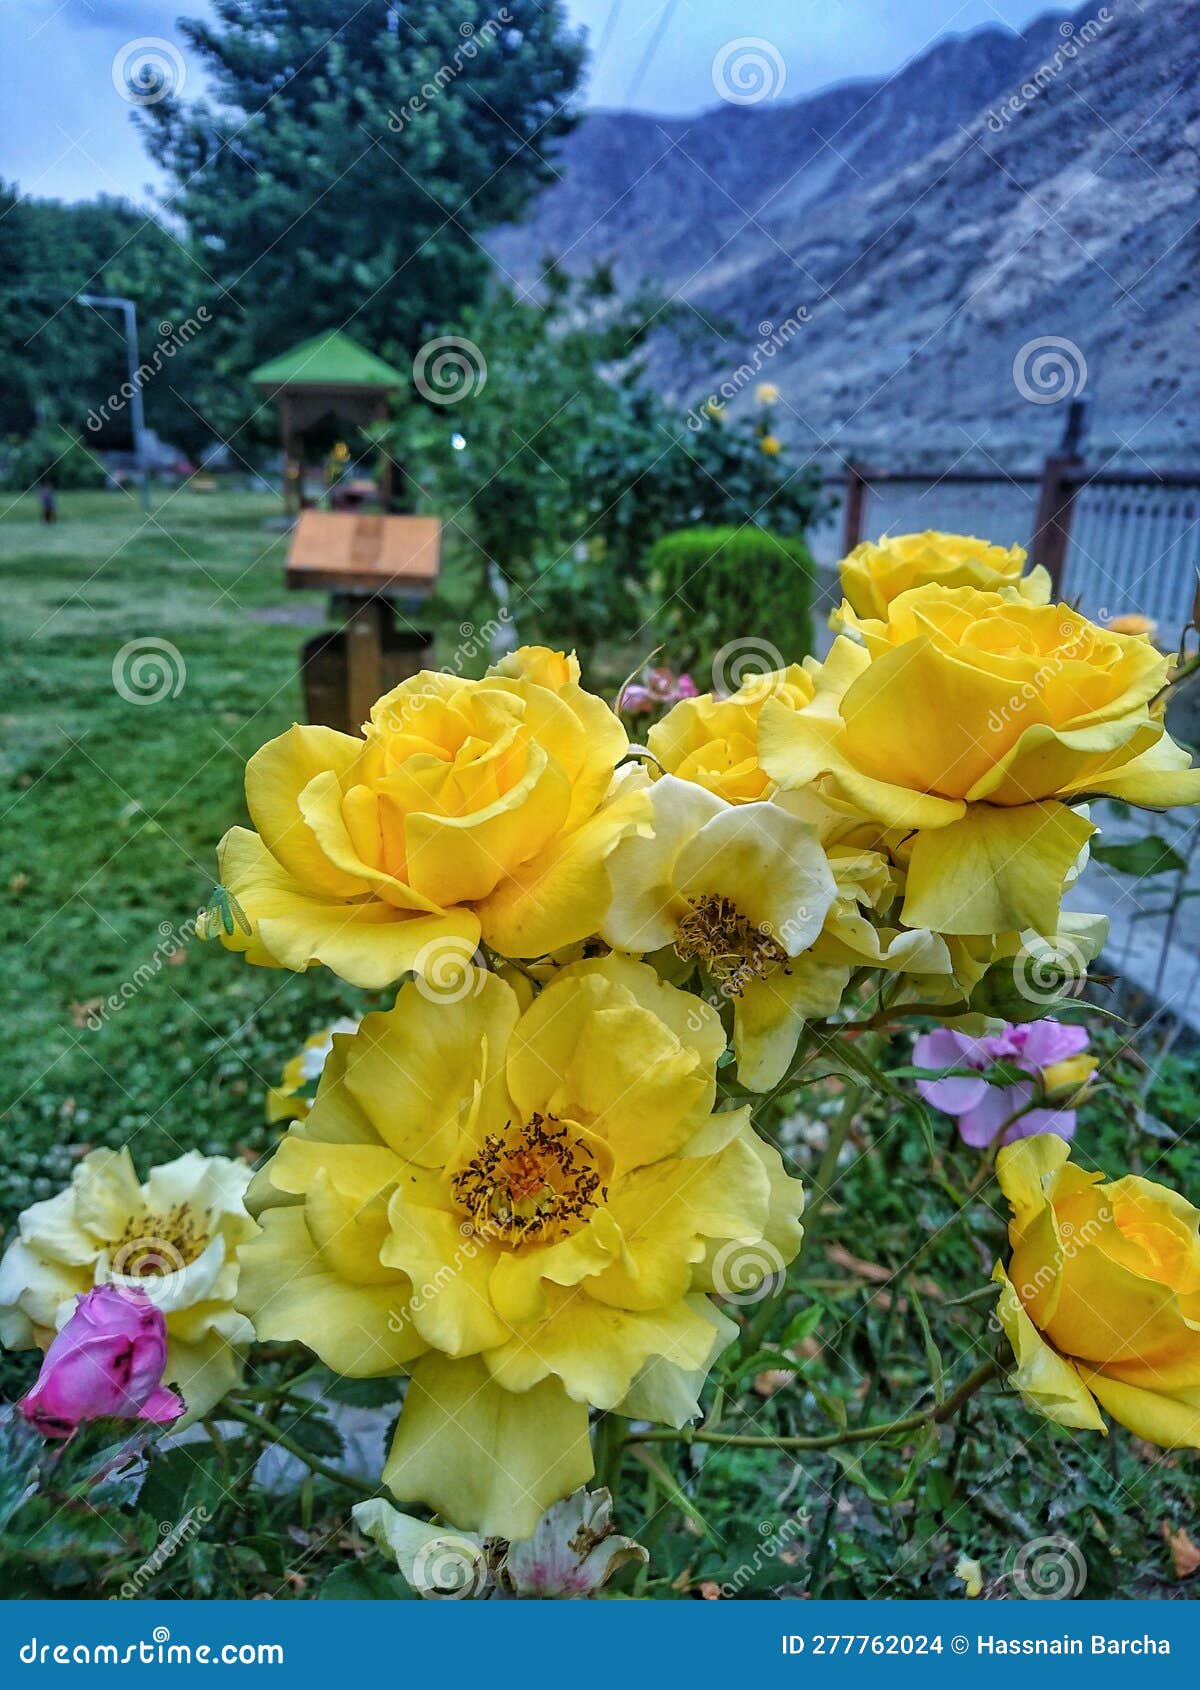 beautiful photo of yellow flowers in park, green trees and mountain in background partiality blurred